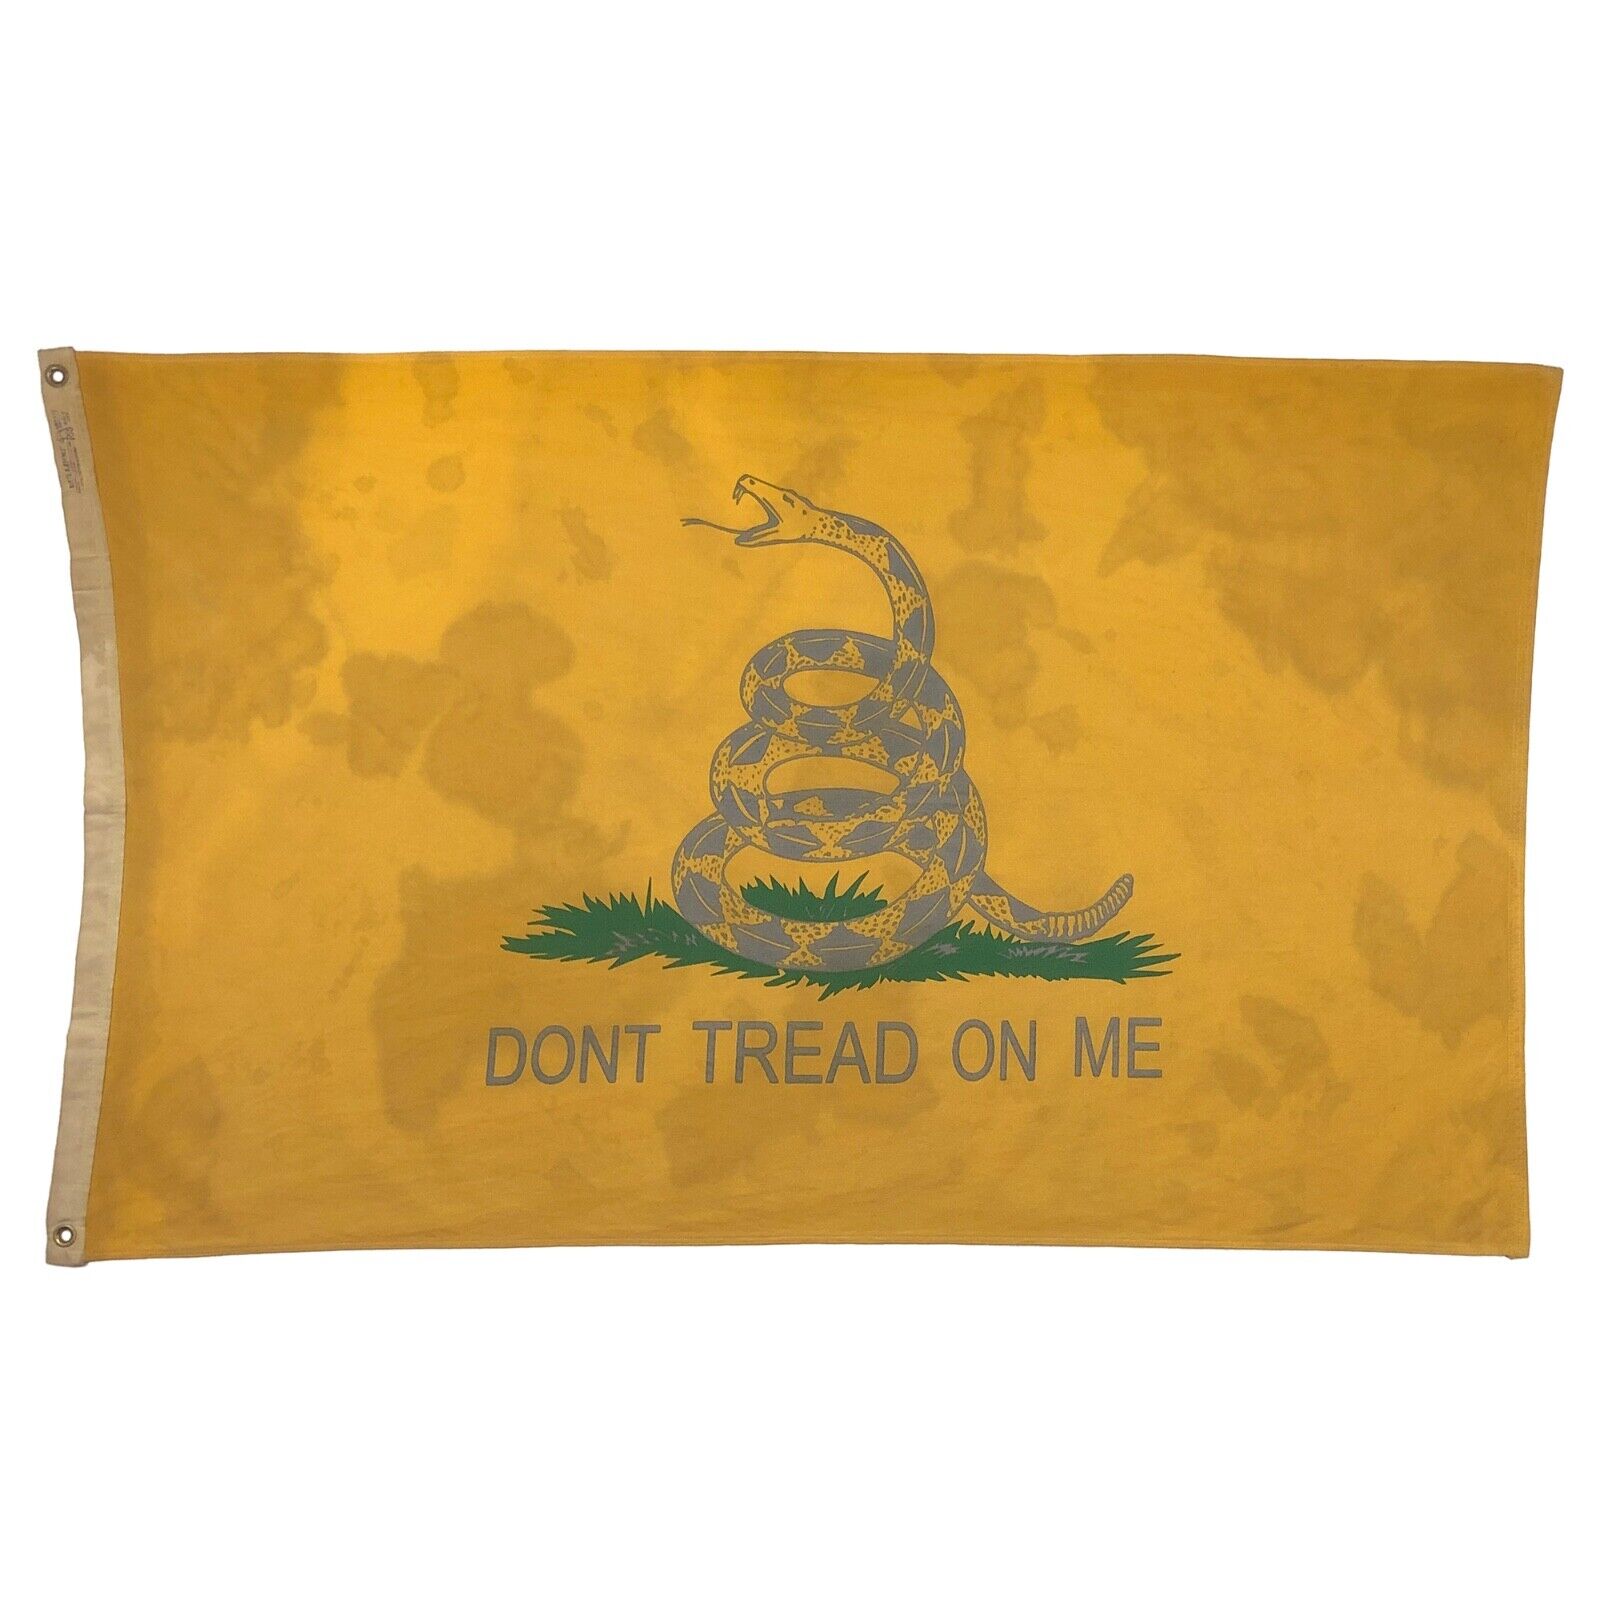 Vintage Cotton Gadsden Flag Old Cloth Snake American Don't Tread On Me USA Dont